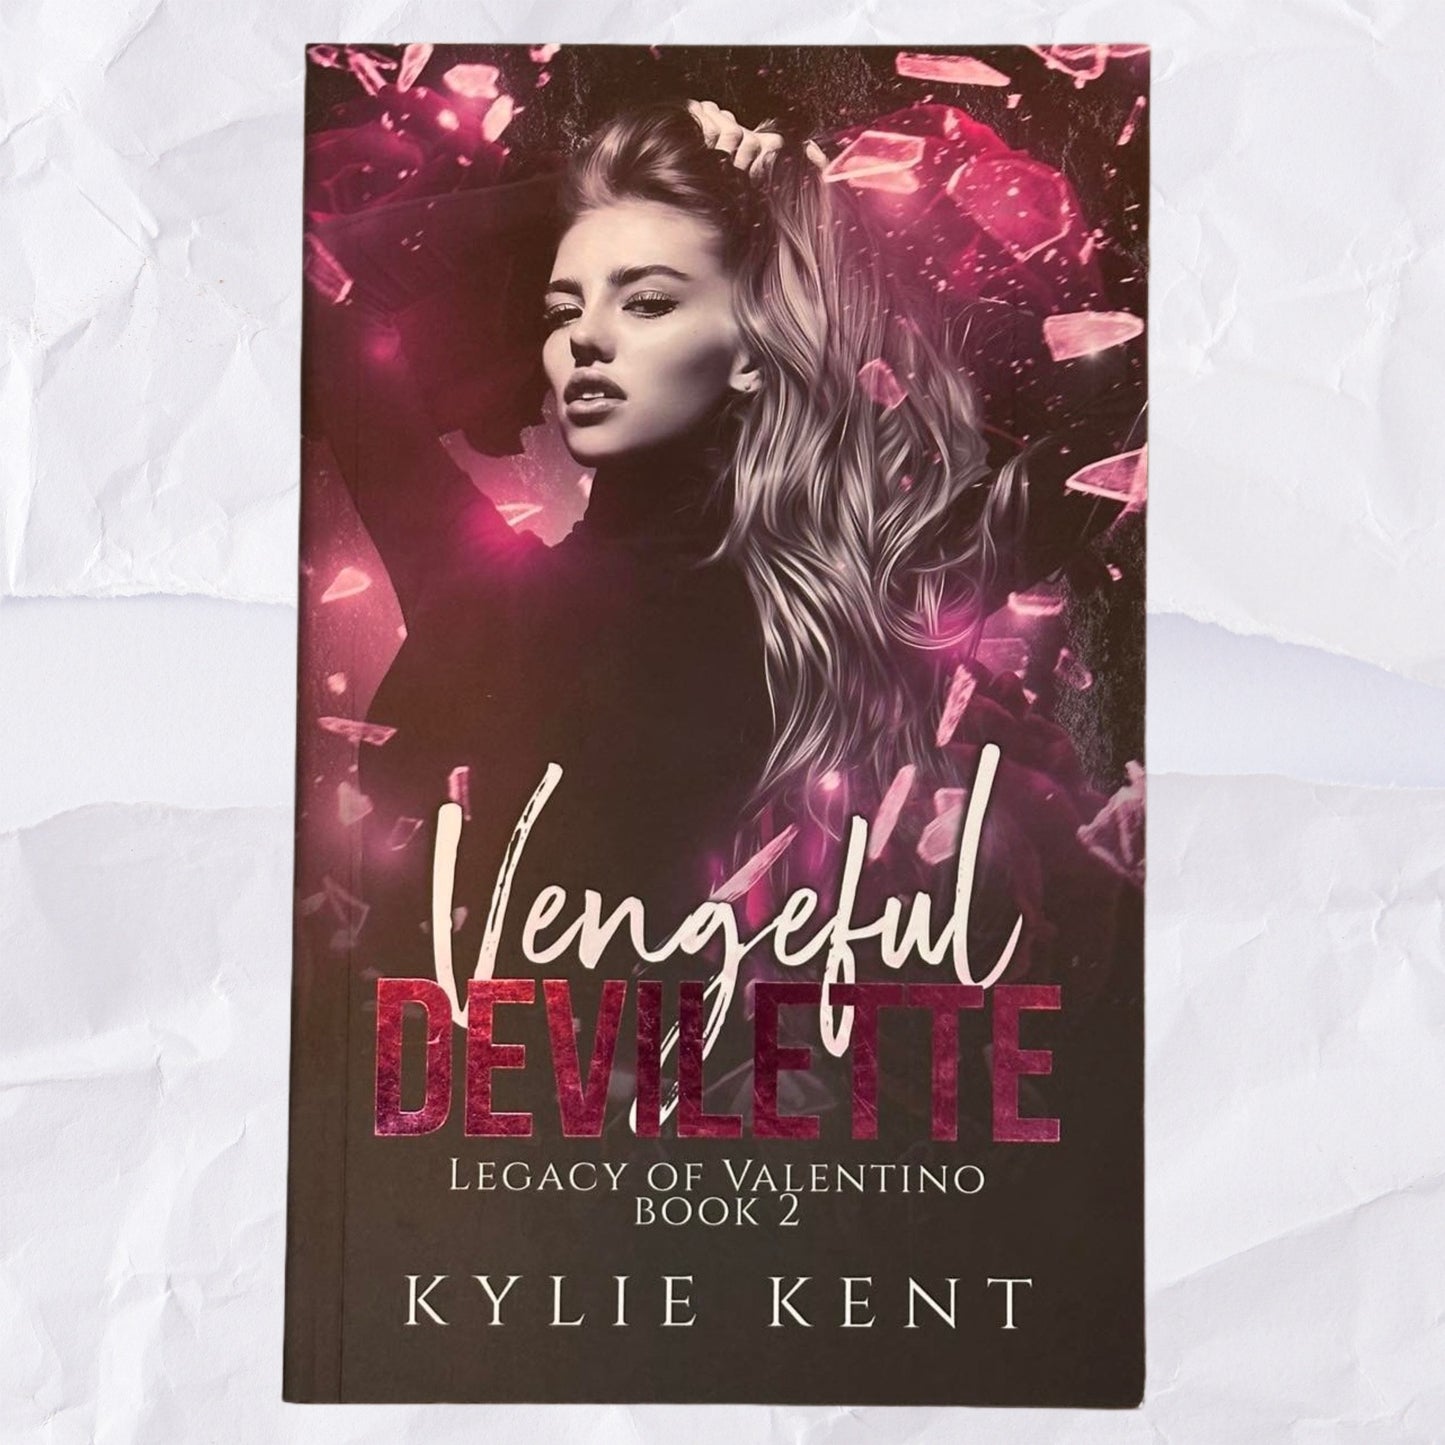 Vengeful Devilette (Legacy of Valentino #2) by Kylie Kent - Foiled Edition